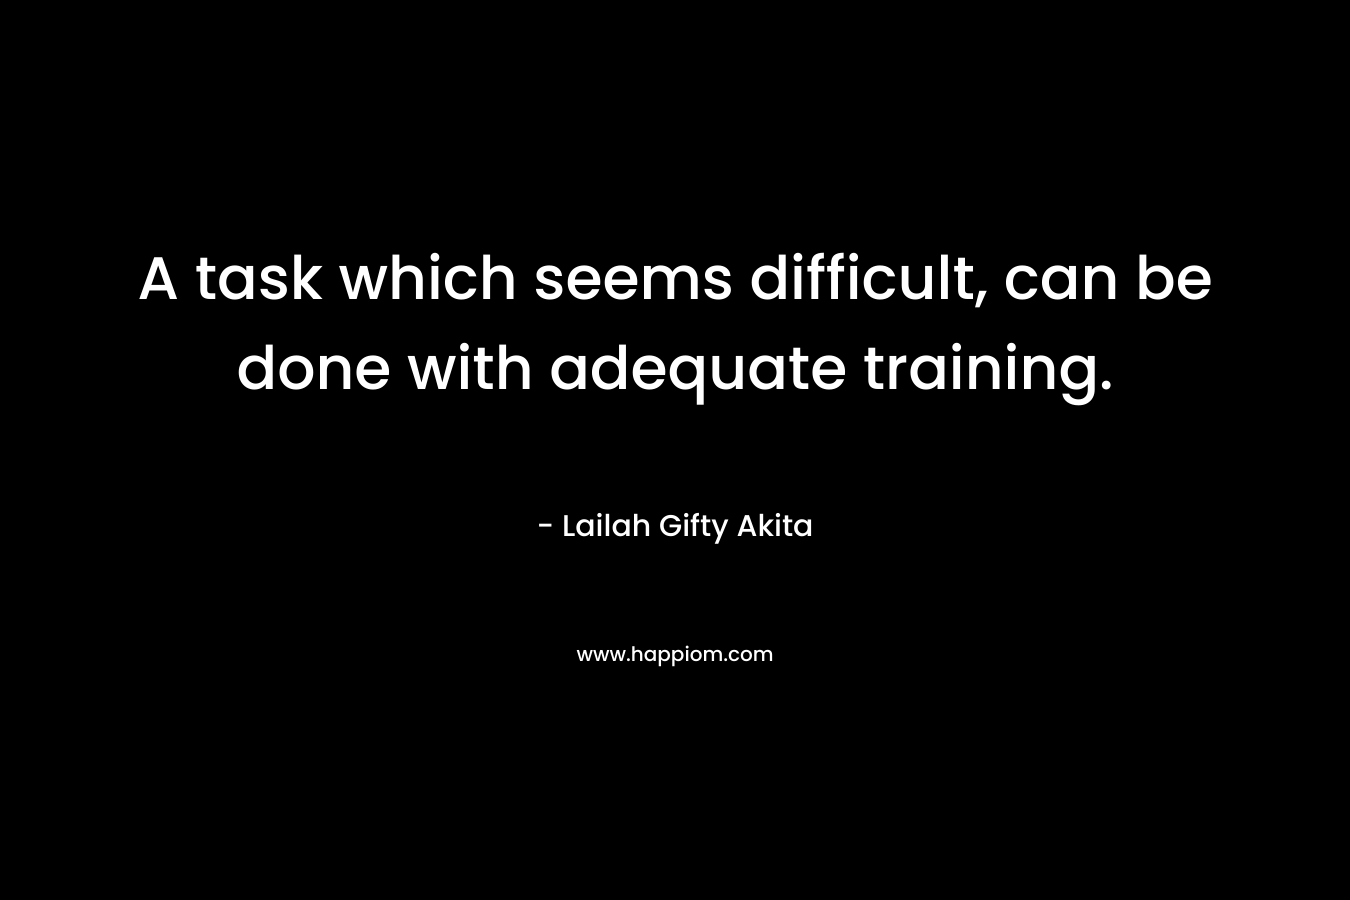 A task which seems difficult, can be done with adequate training.